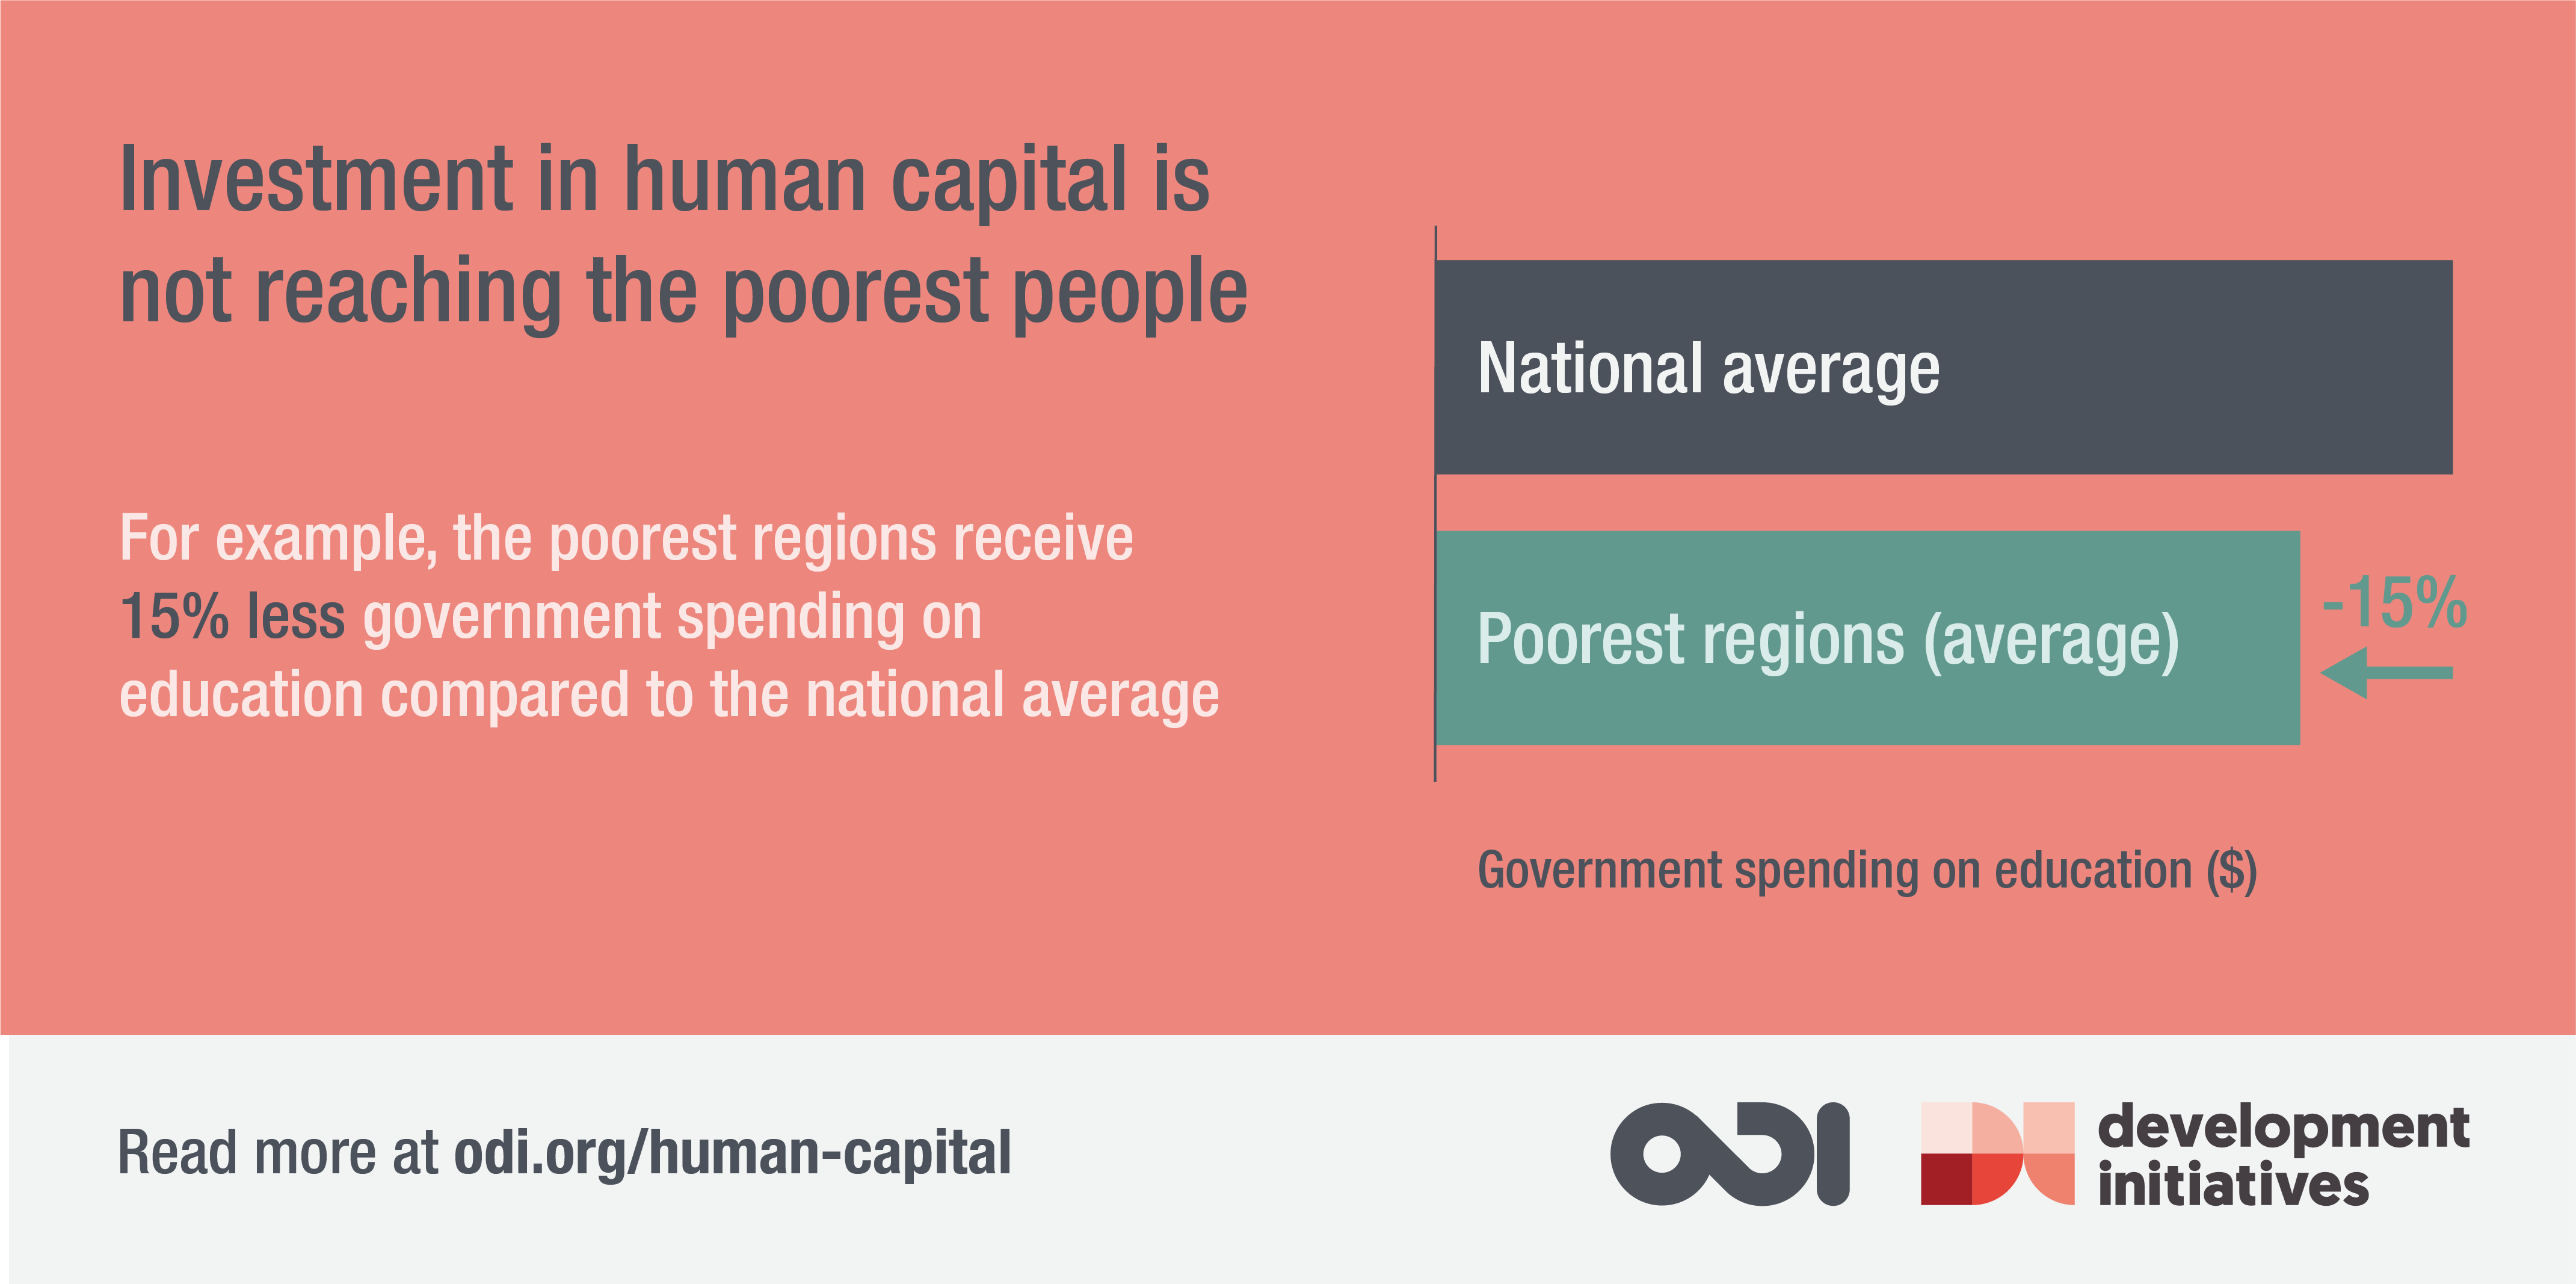 The poorest regions receive 15% less government spending on education compared to the national average